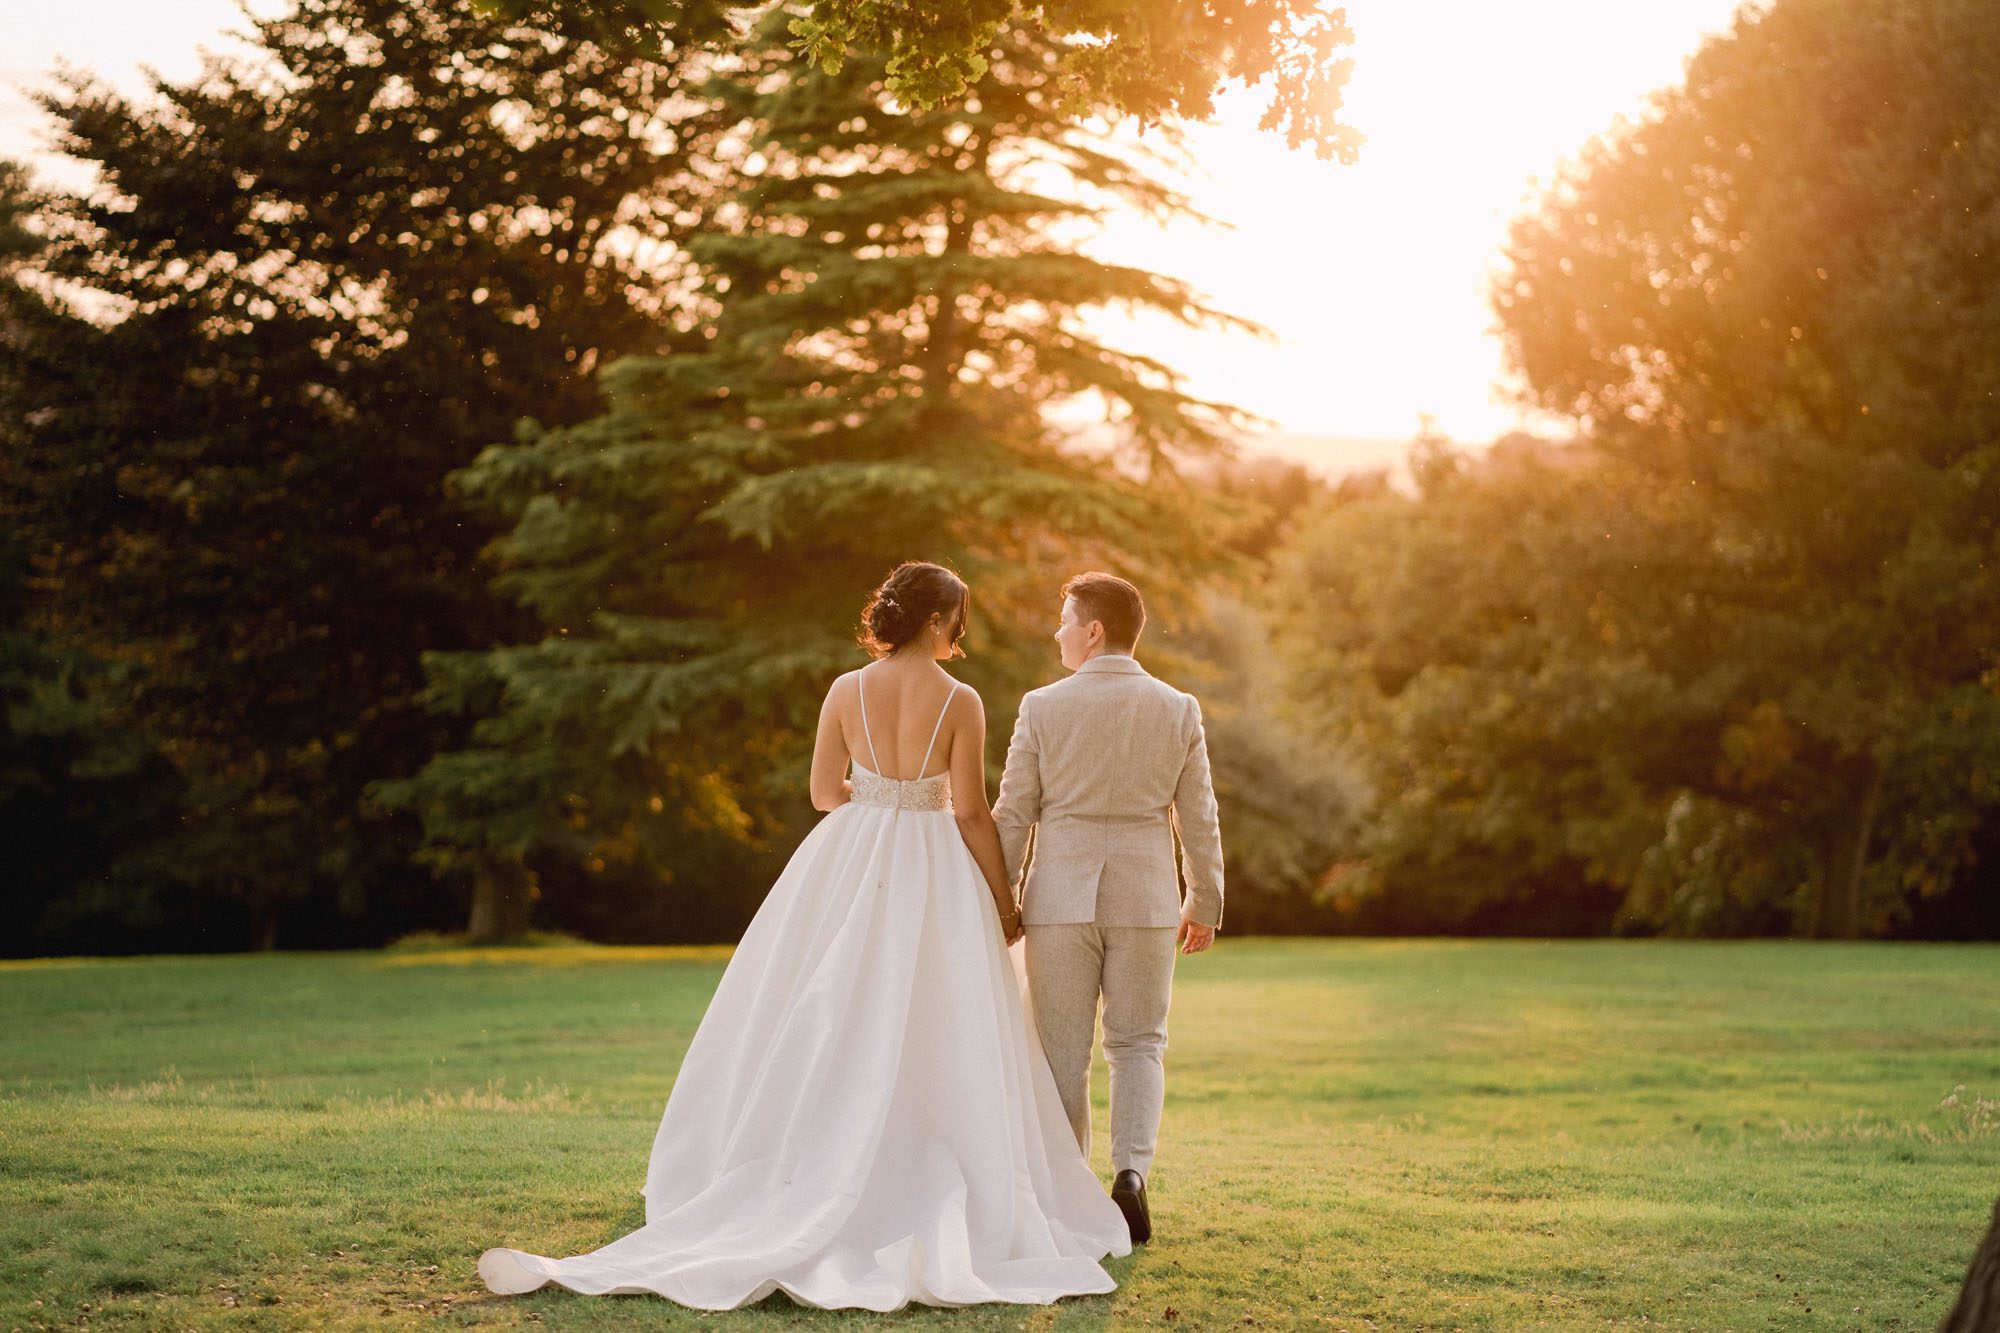 Bride and groom smiling walk off in to the sunset on their wedding day at Hartsfield Manor.